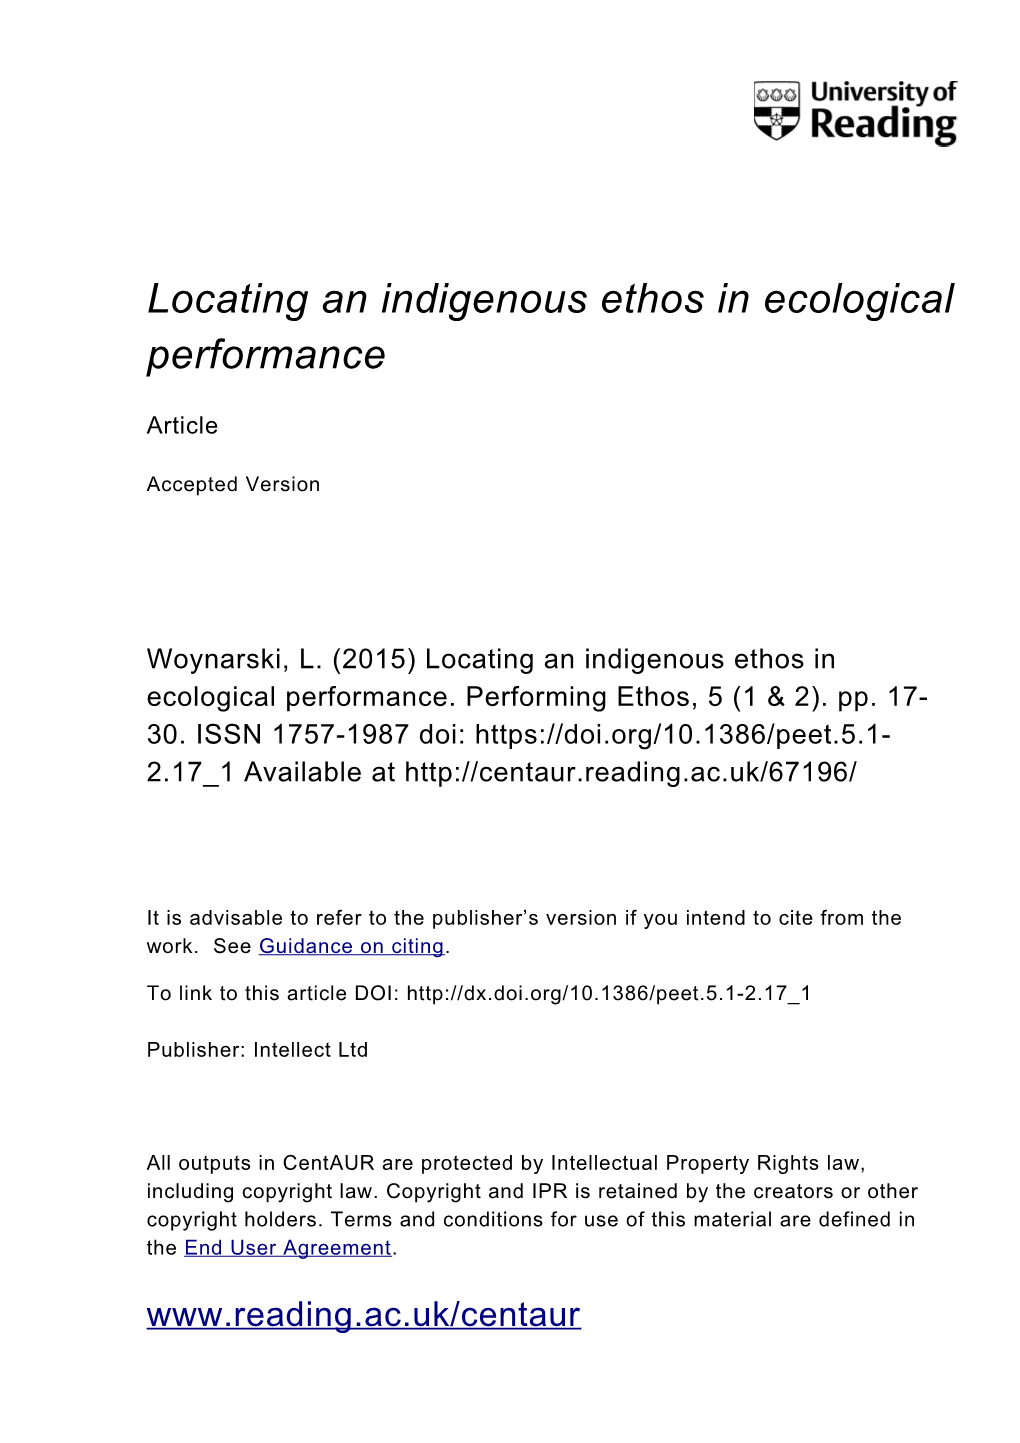 Locating an Indigenous Ethos in Ecological Performance